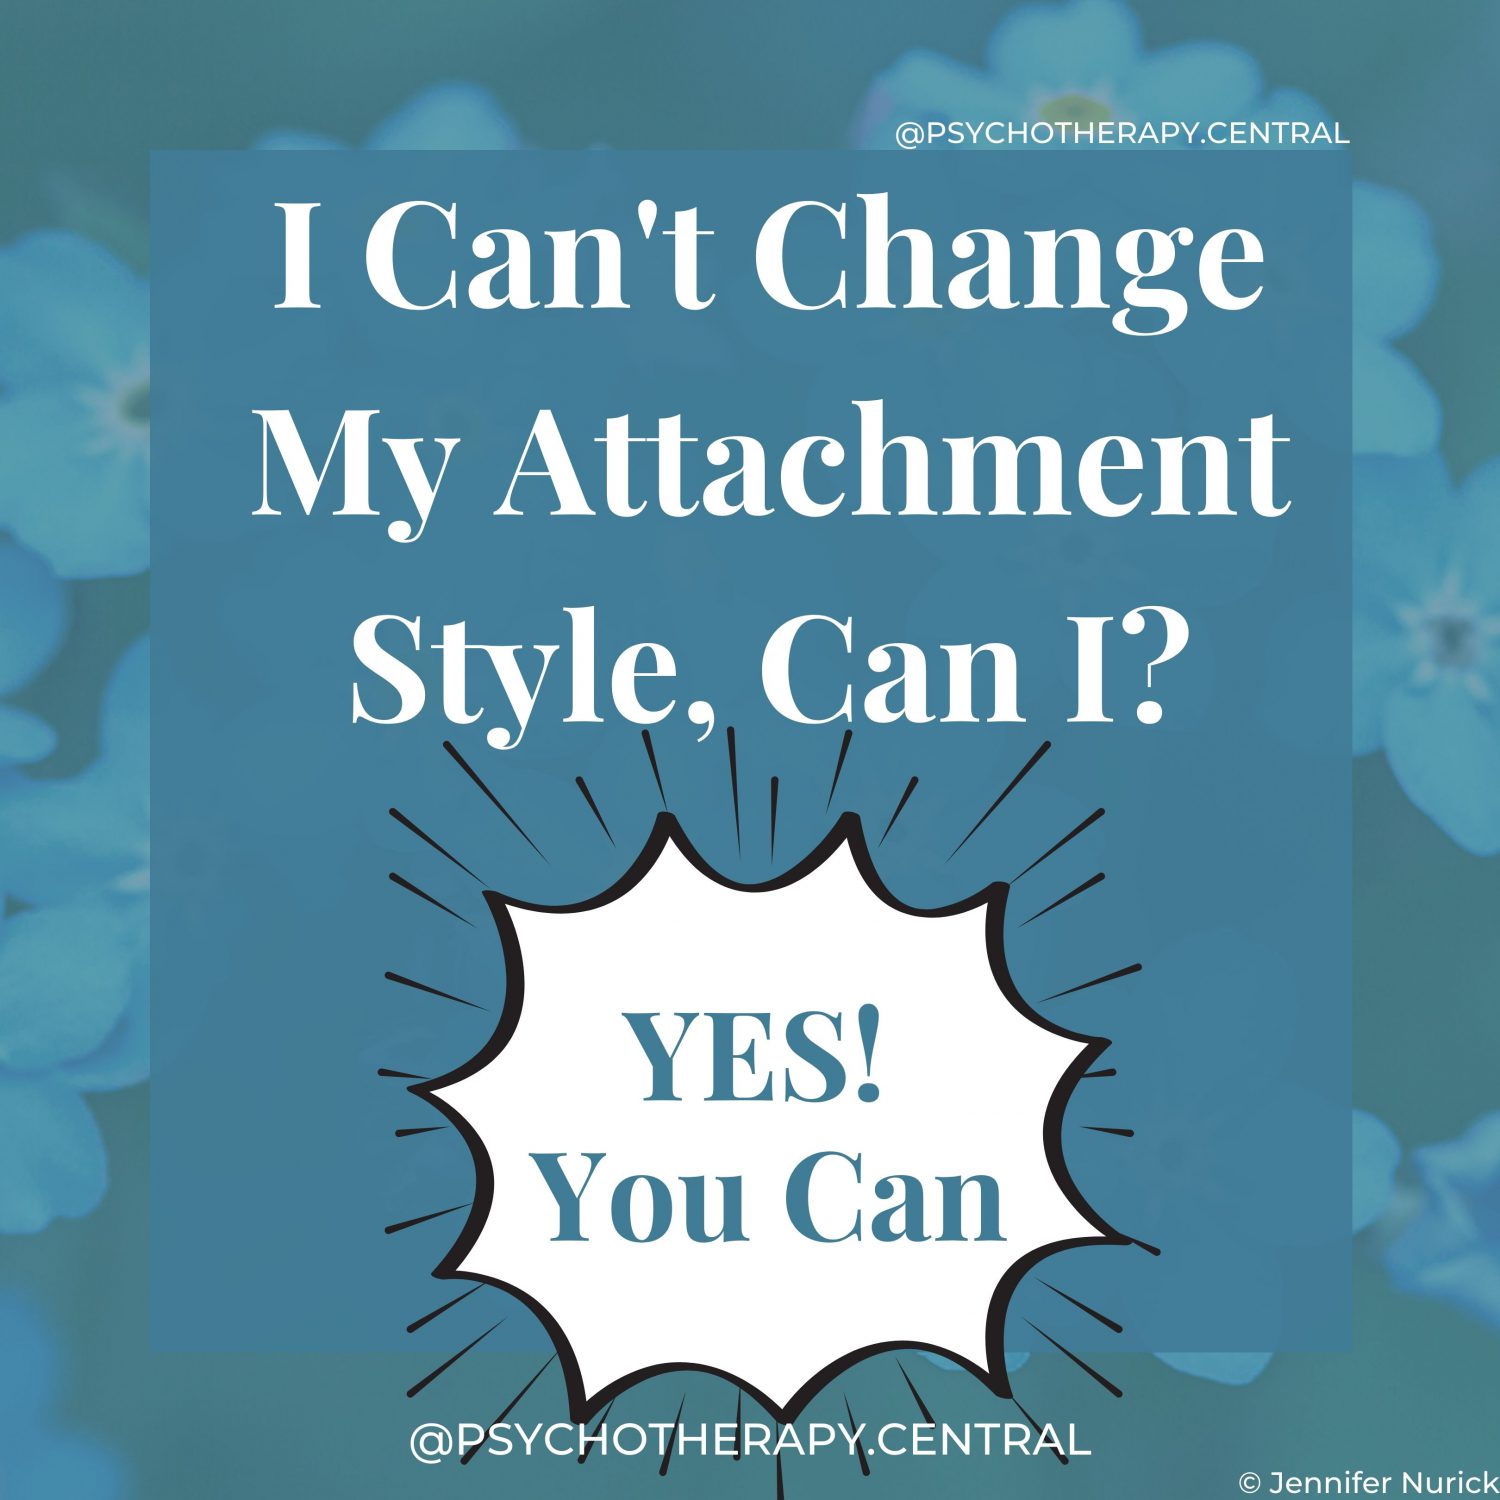 I Can't Change My Attachment Style, Can I? Yes, you can.